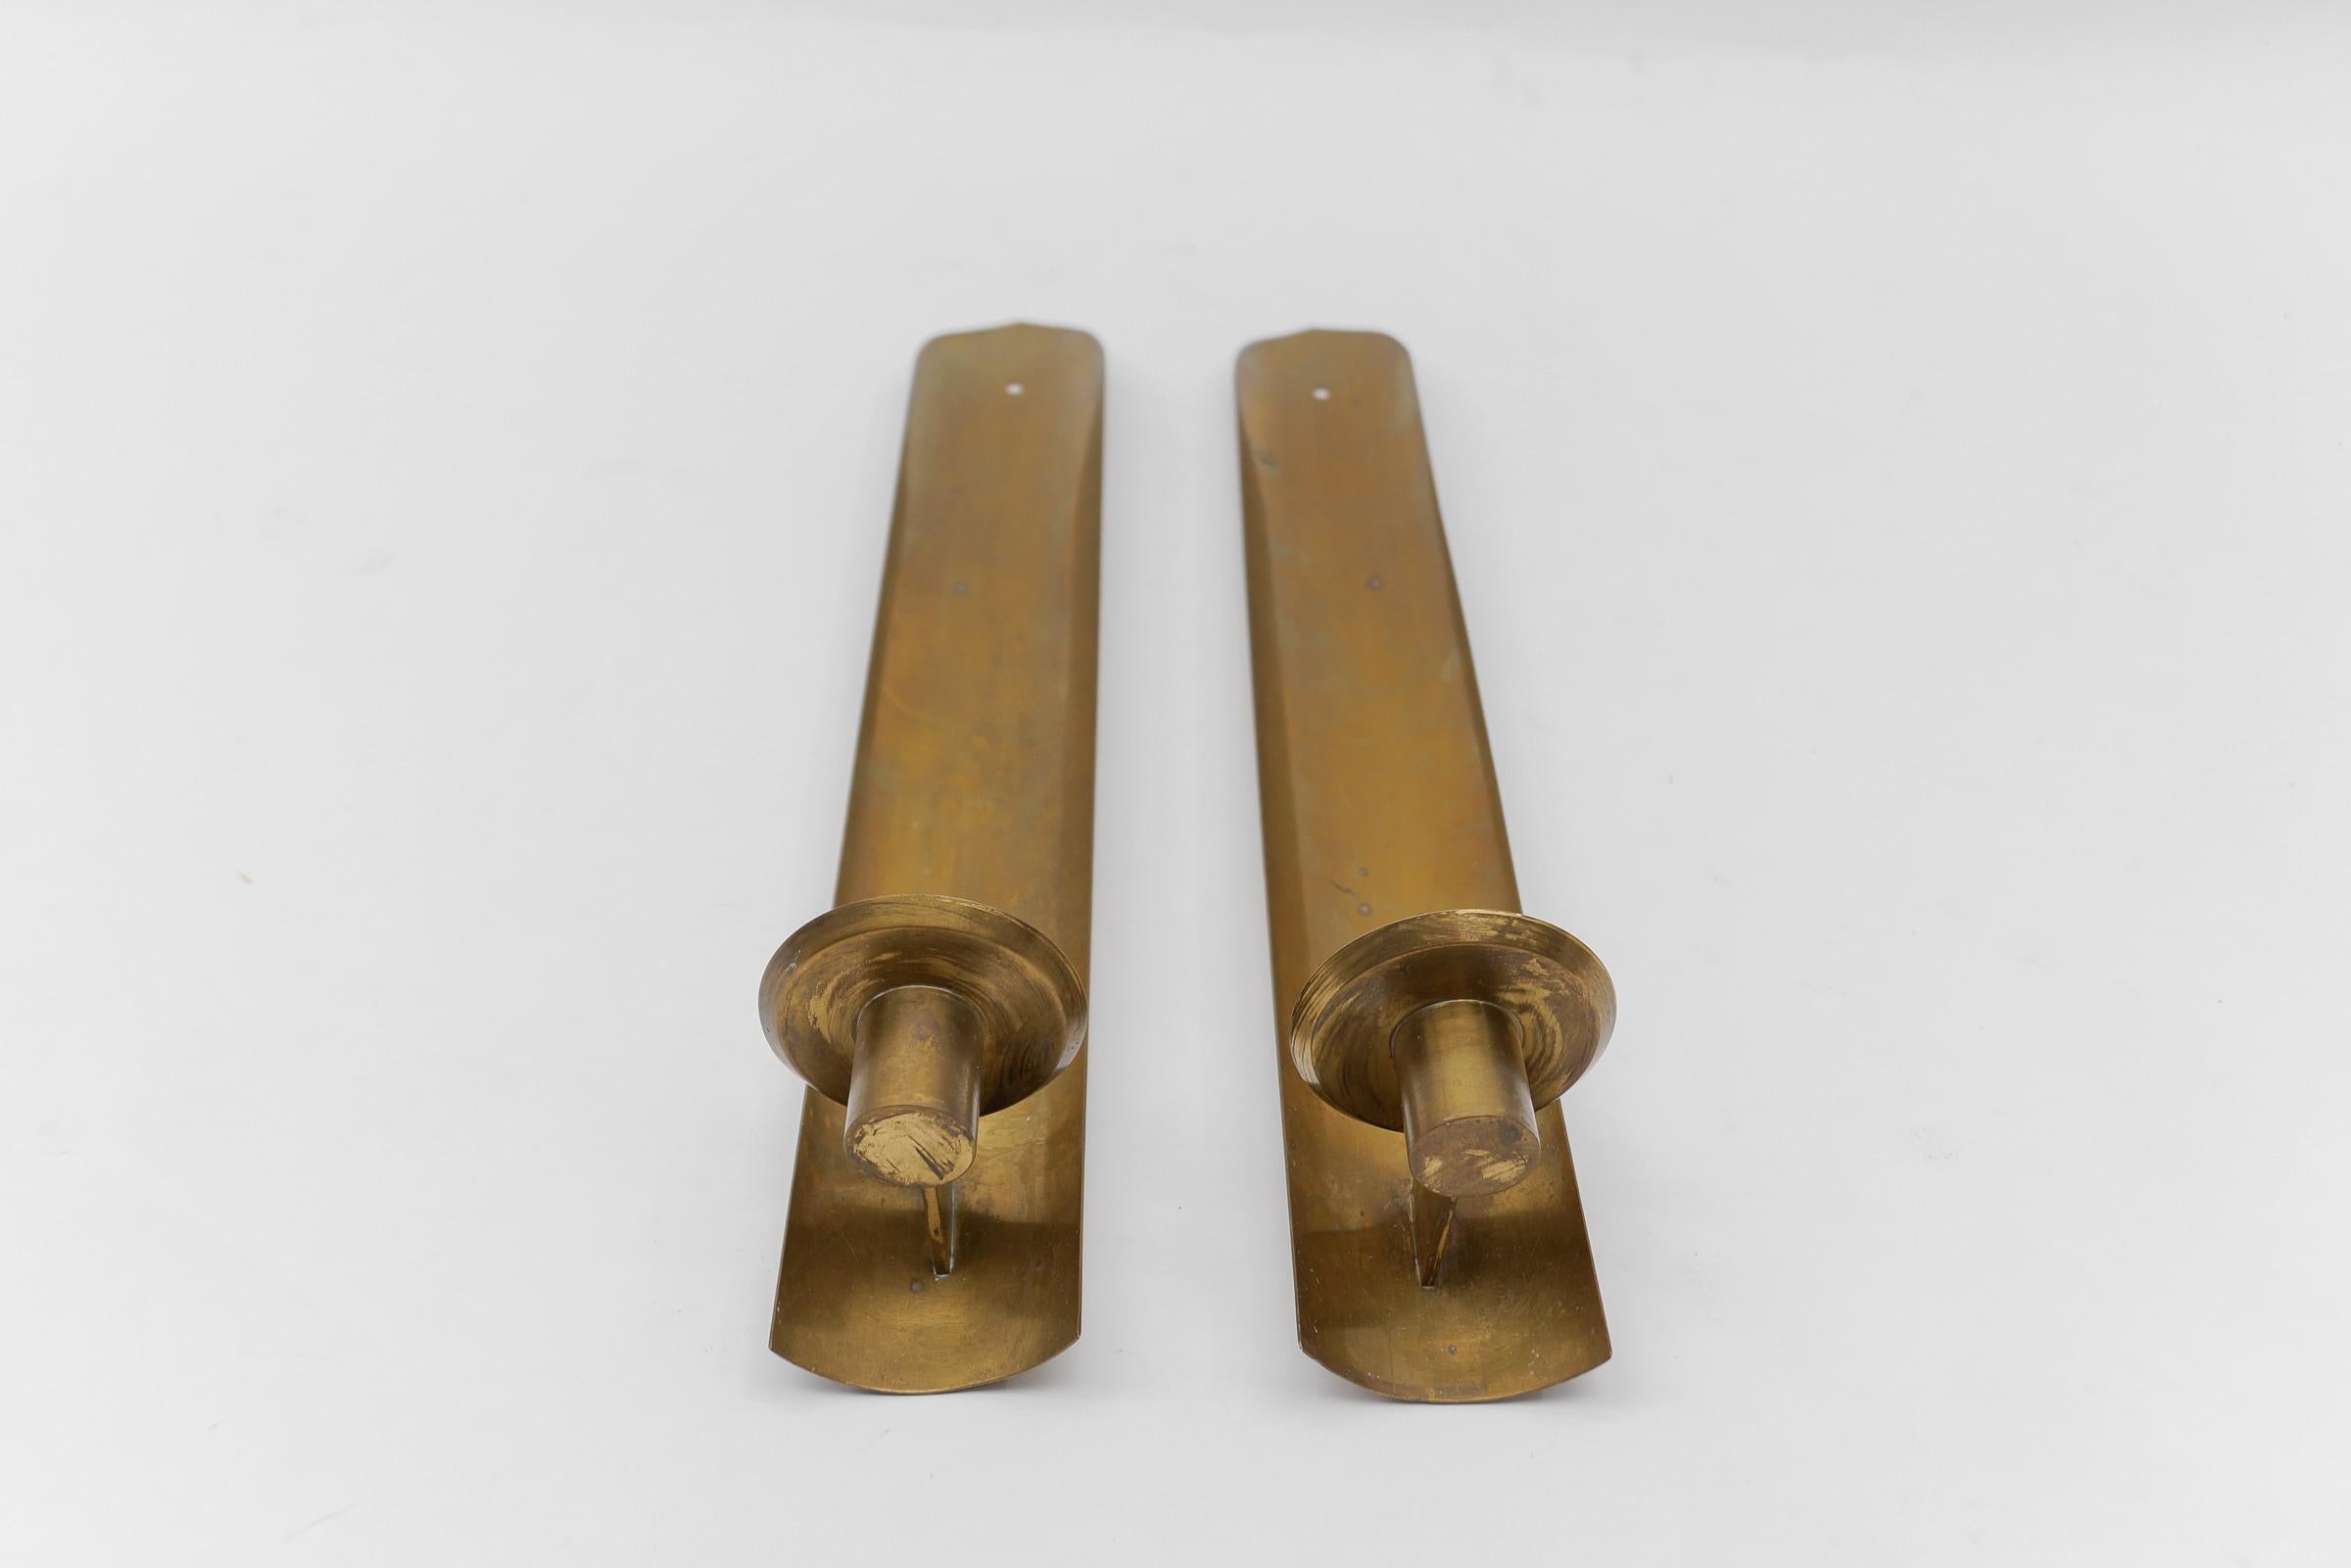 Copper Awesome Pair of Brass Wall Candle Holder, 1950s Austria For Sale